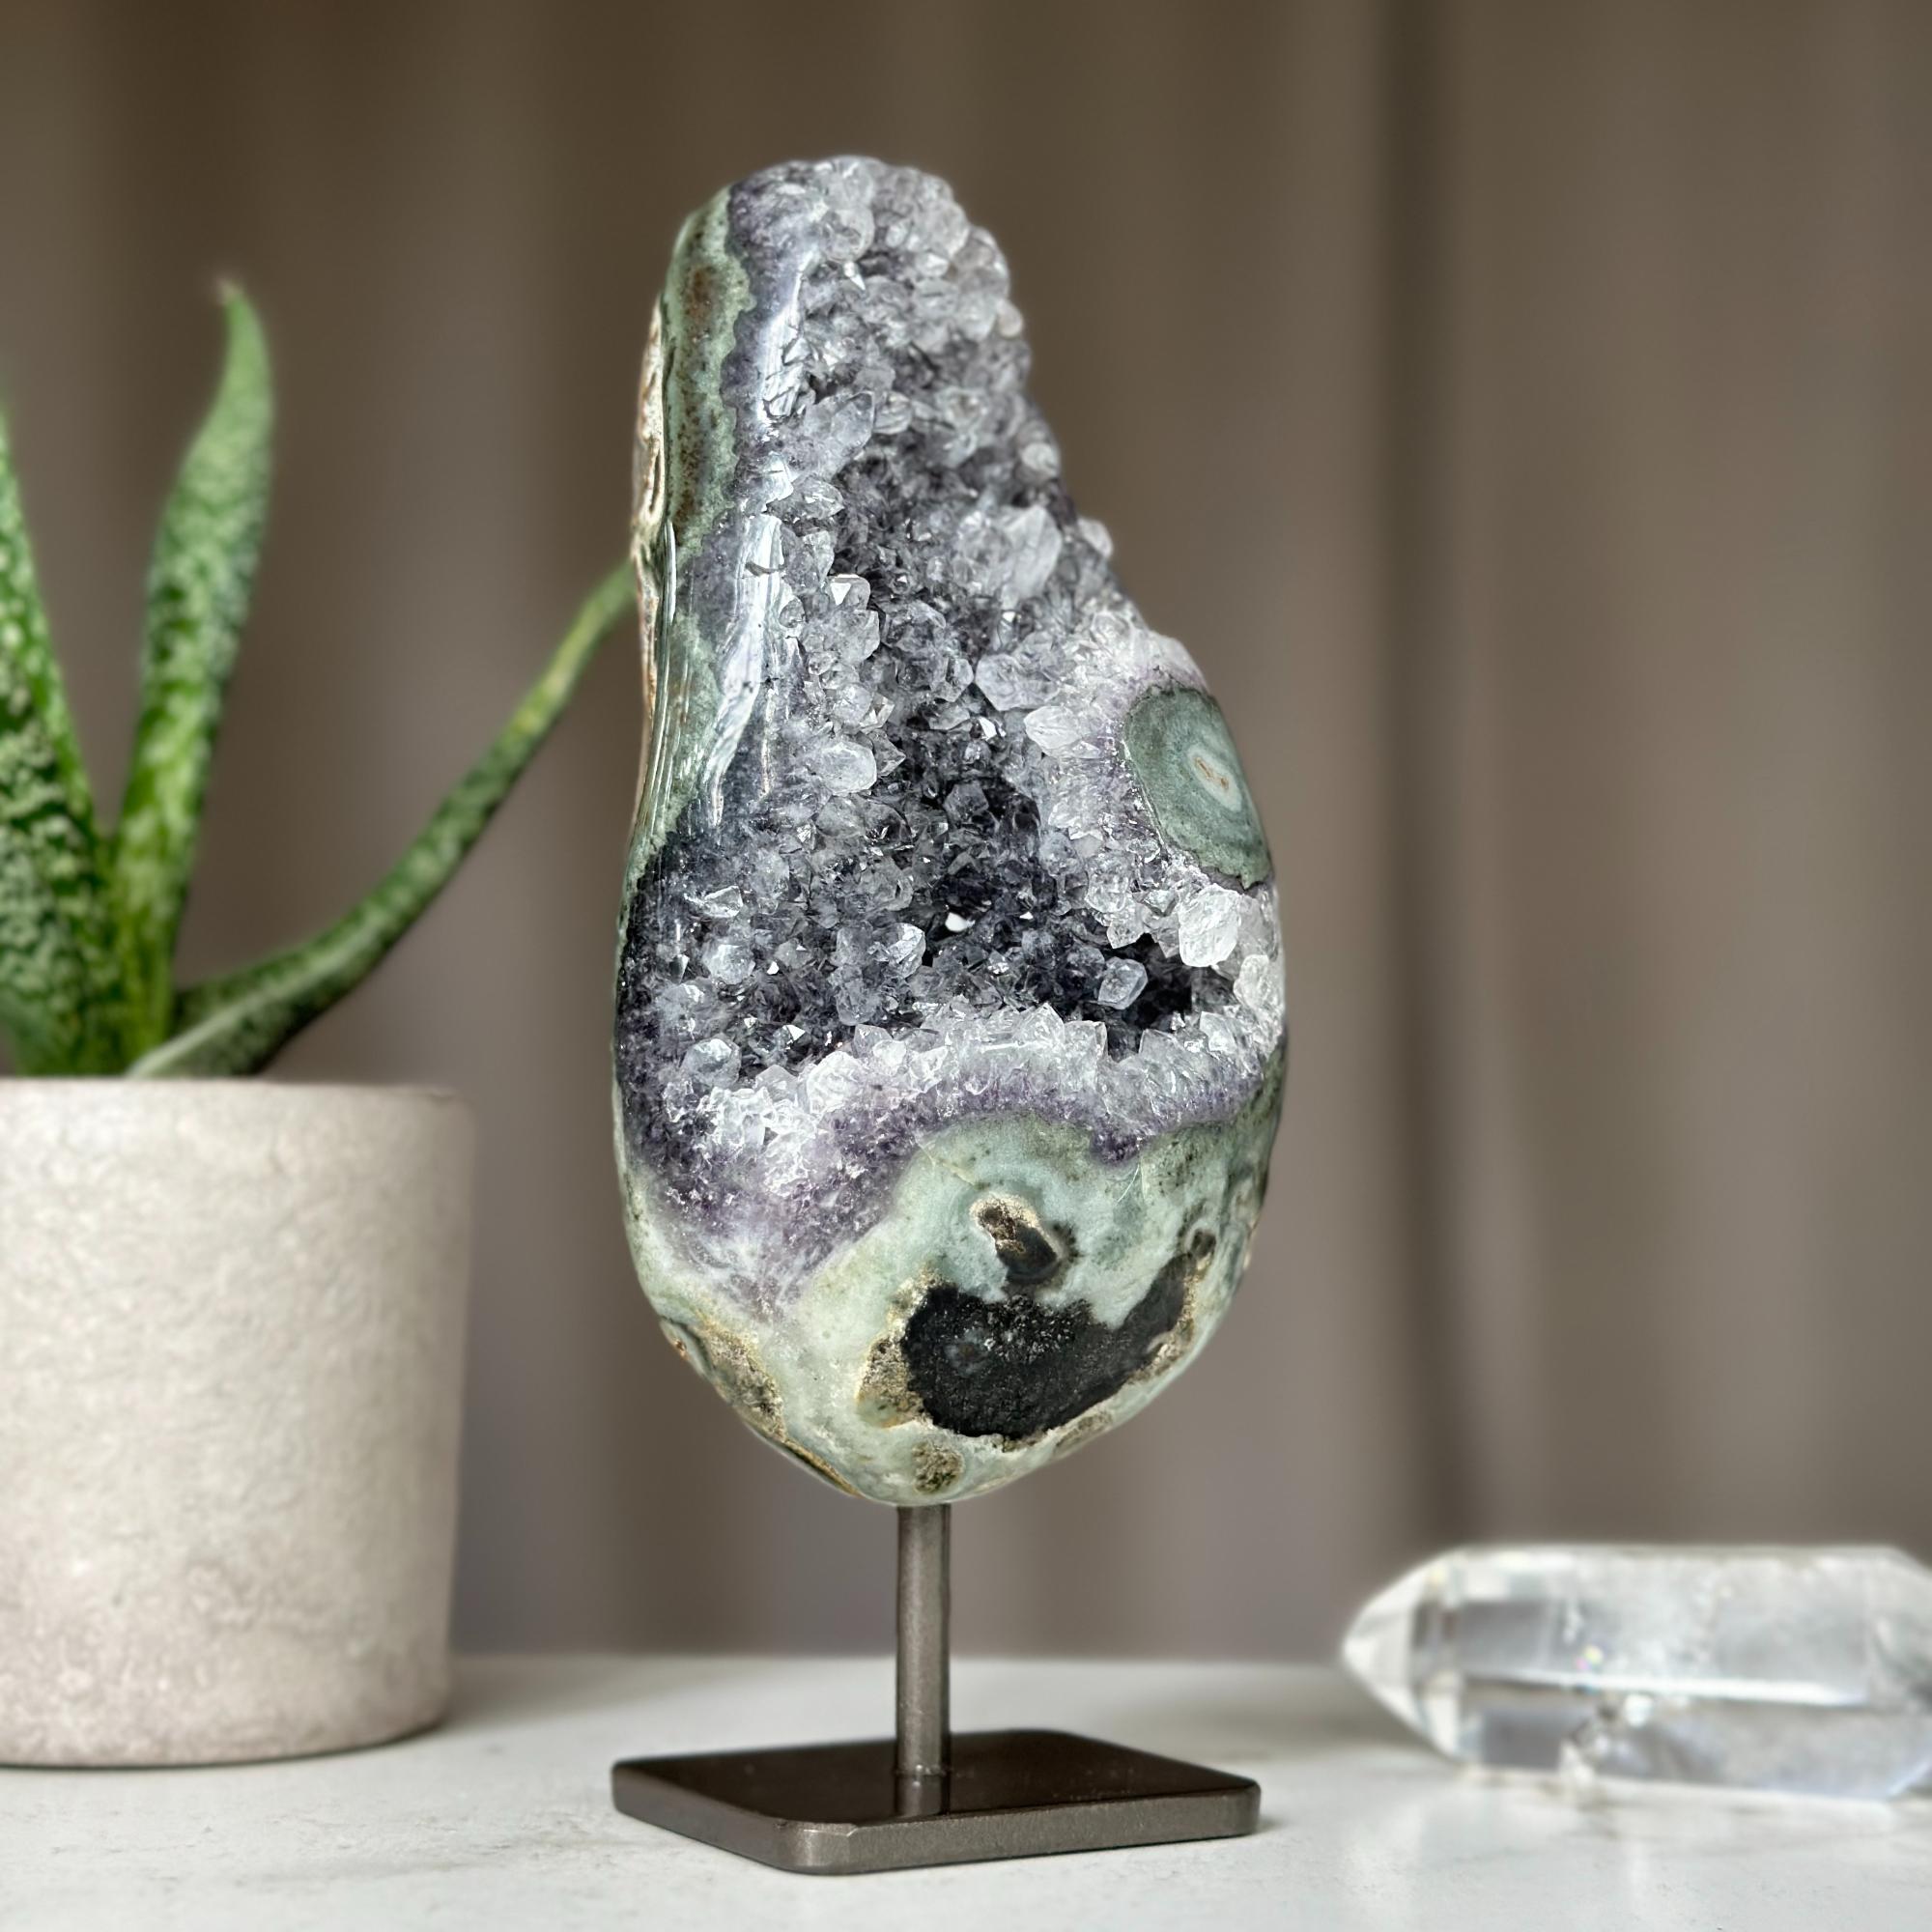 Rare Crystal Amethyst, Geode with metallic base included for home decoration